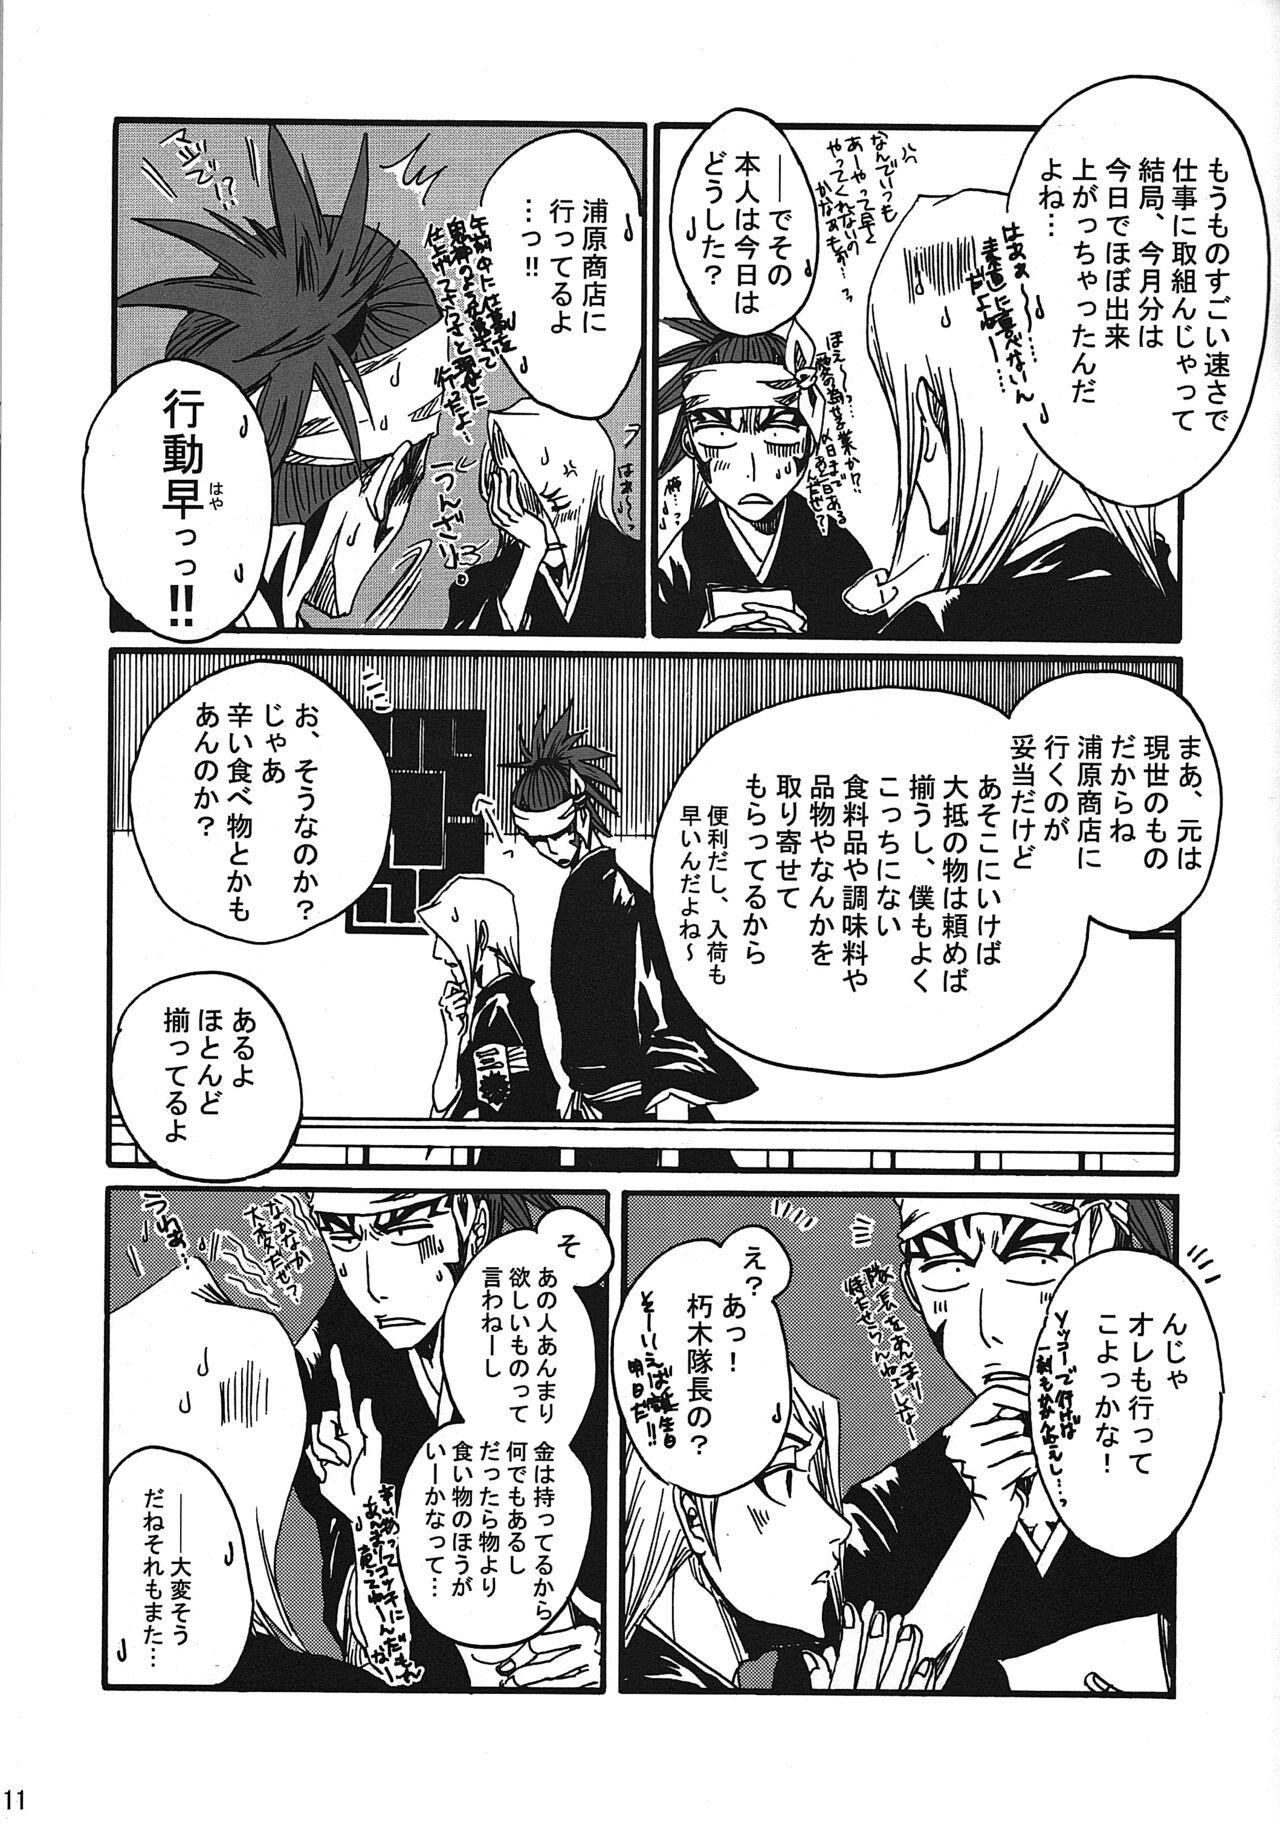 Costume Fussing about nothing of lovers - Bleach Madura - Page 12